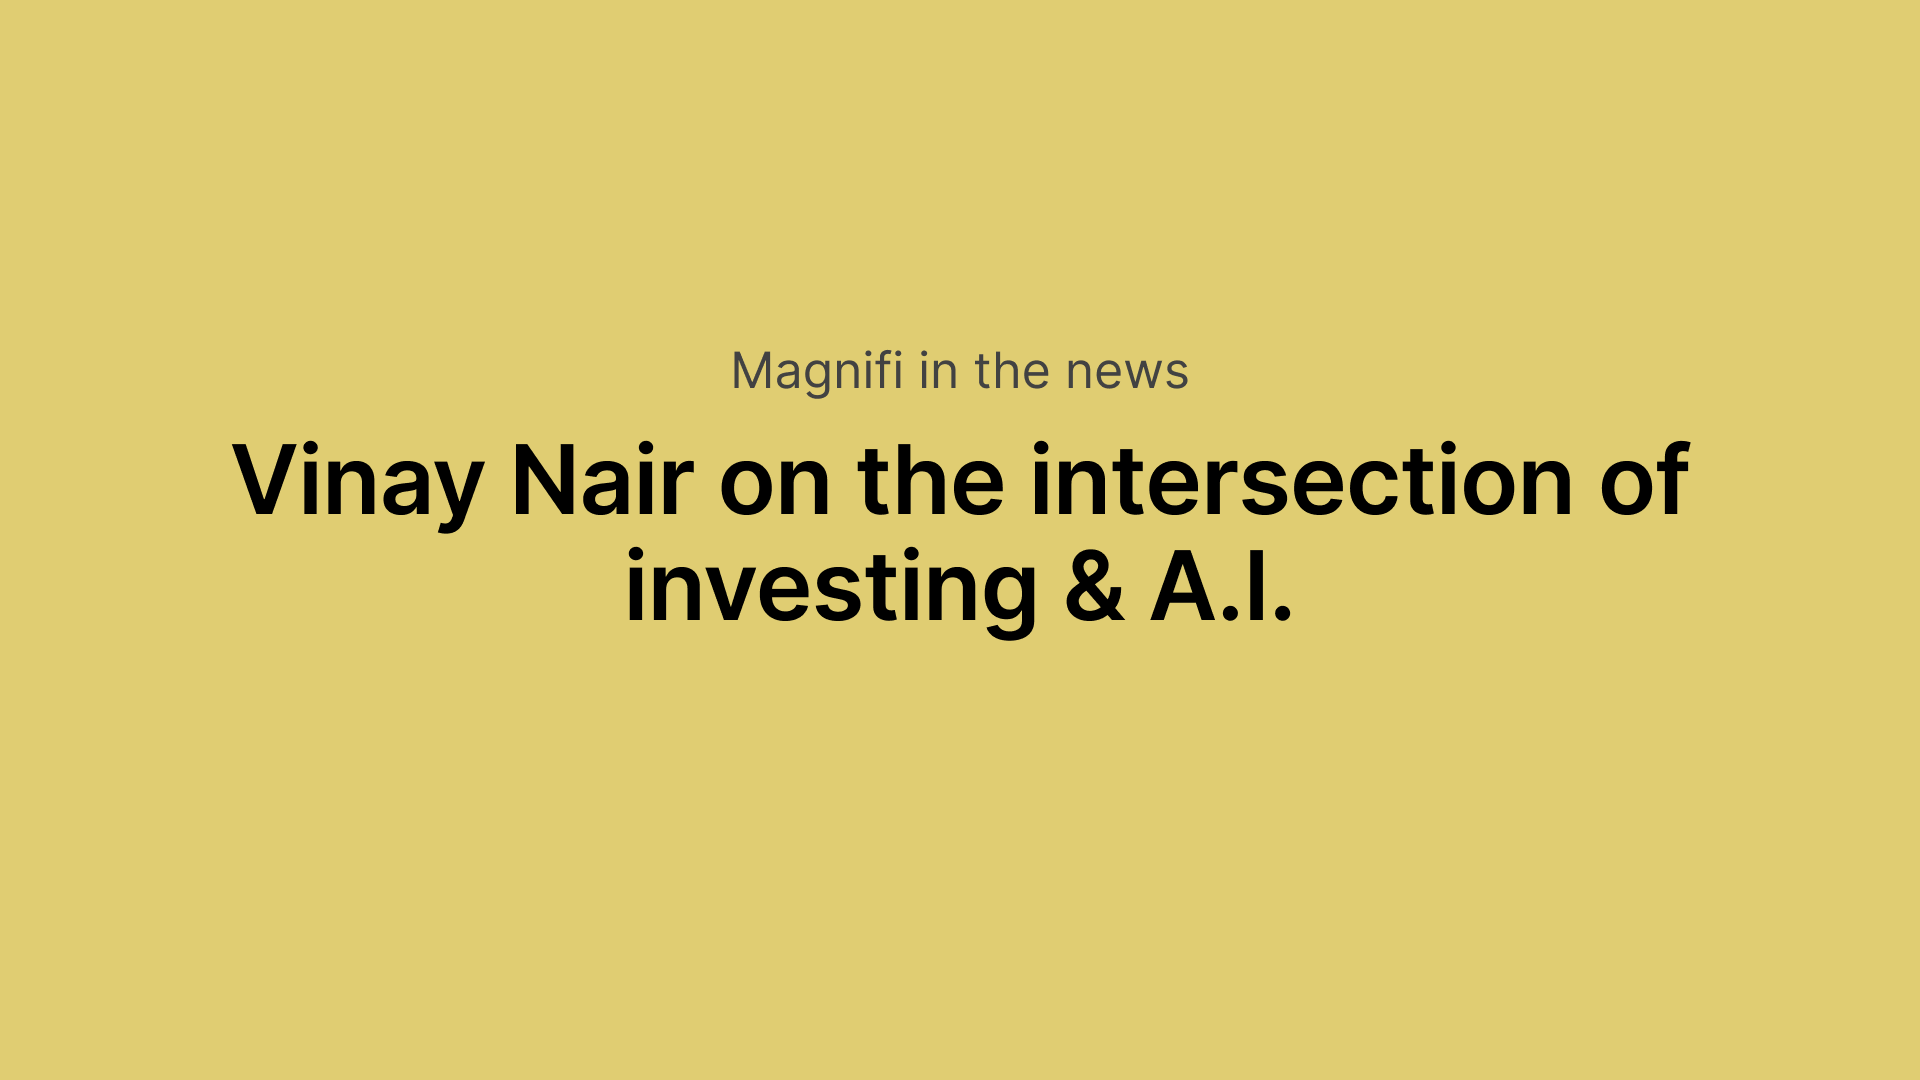 Magnifi in the news
Vinay Nair on the intersection of investing & A.I.
